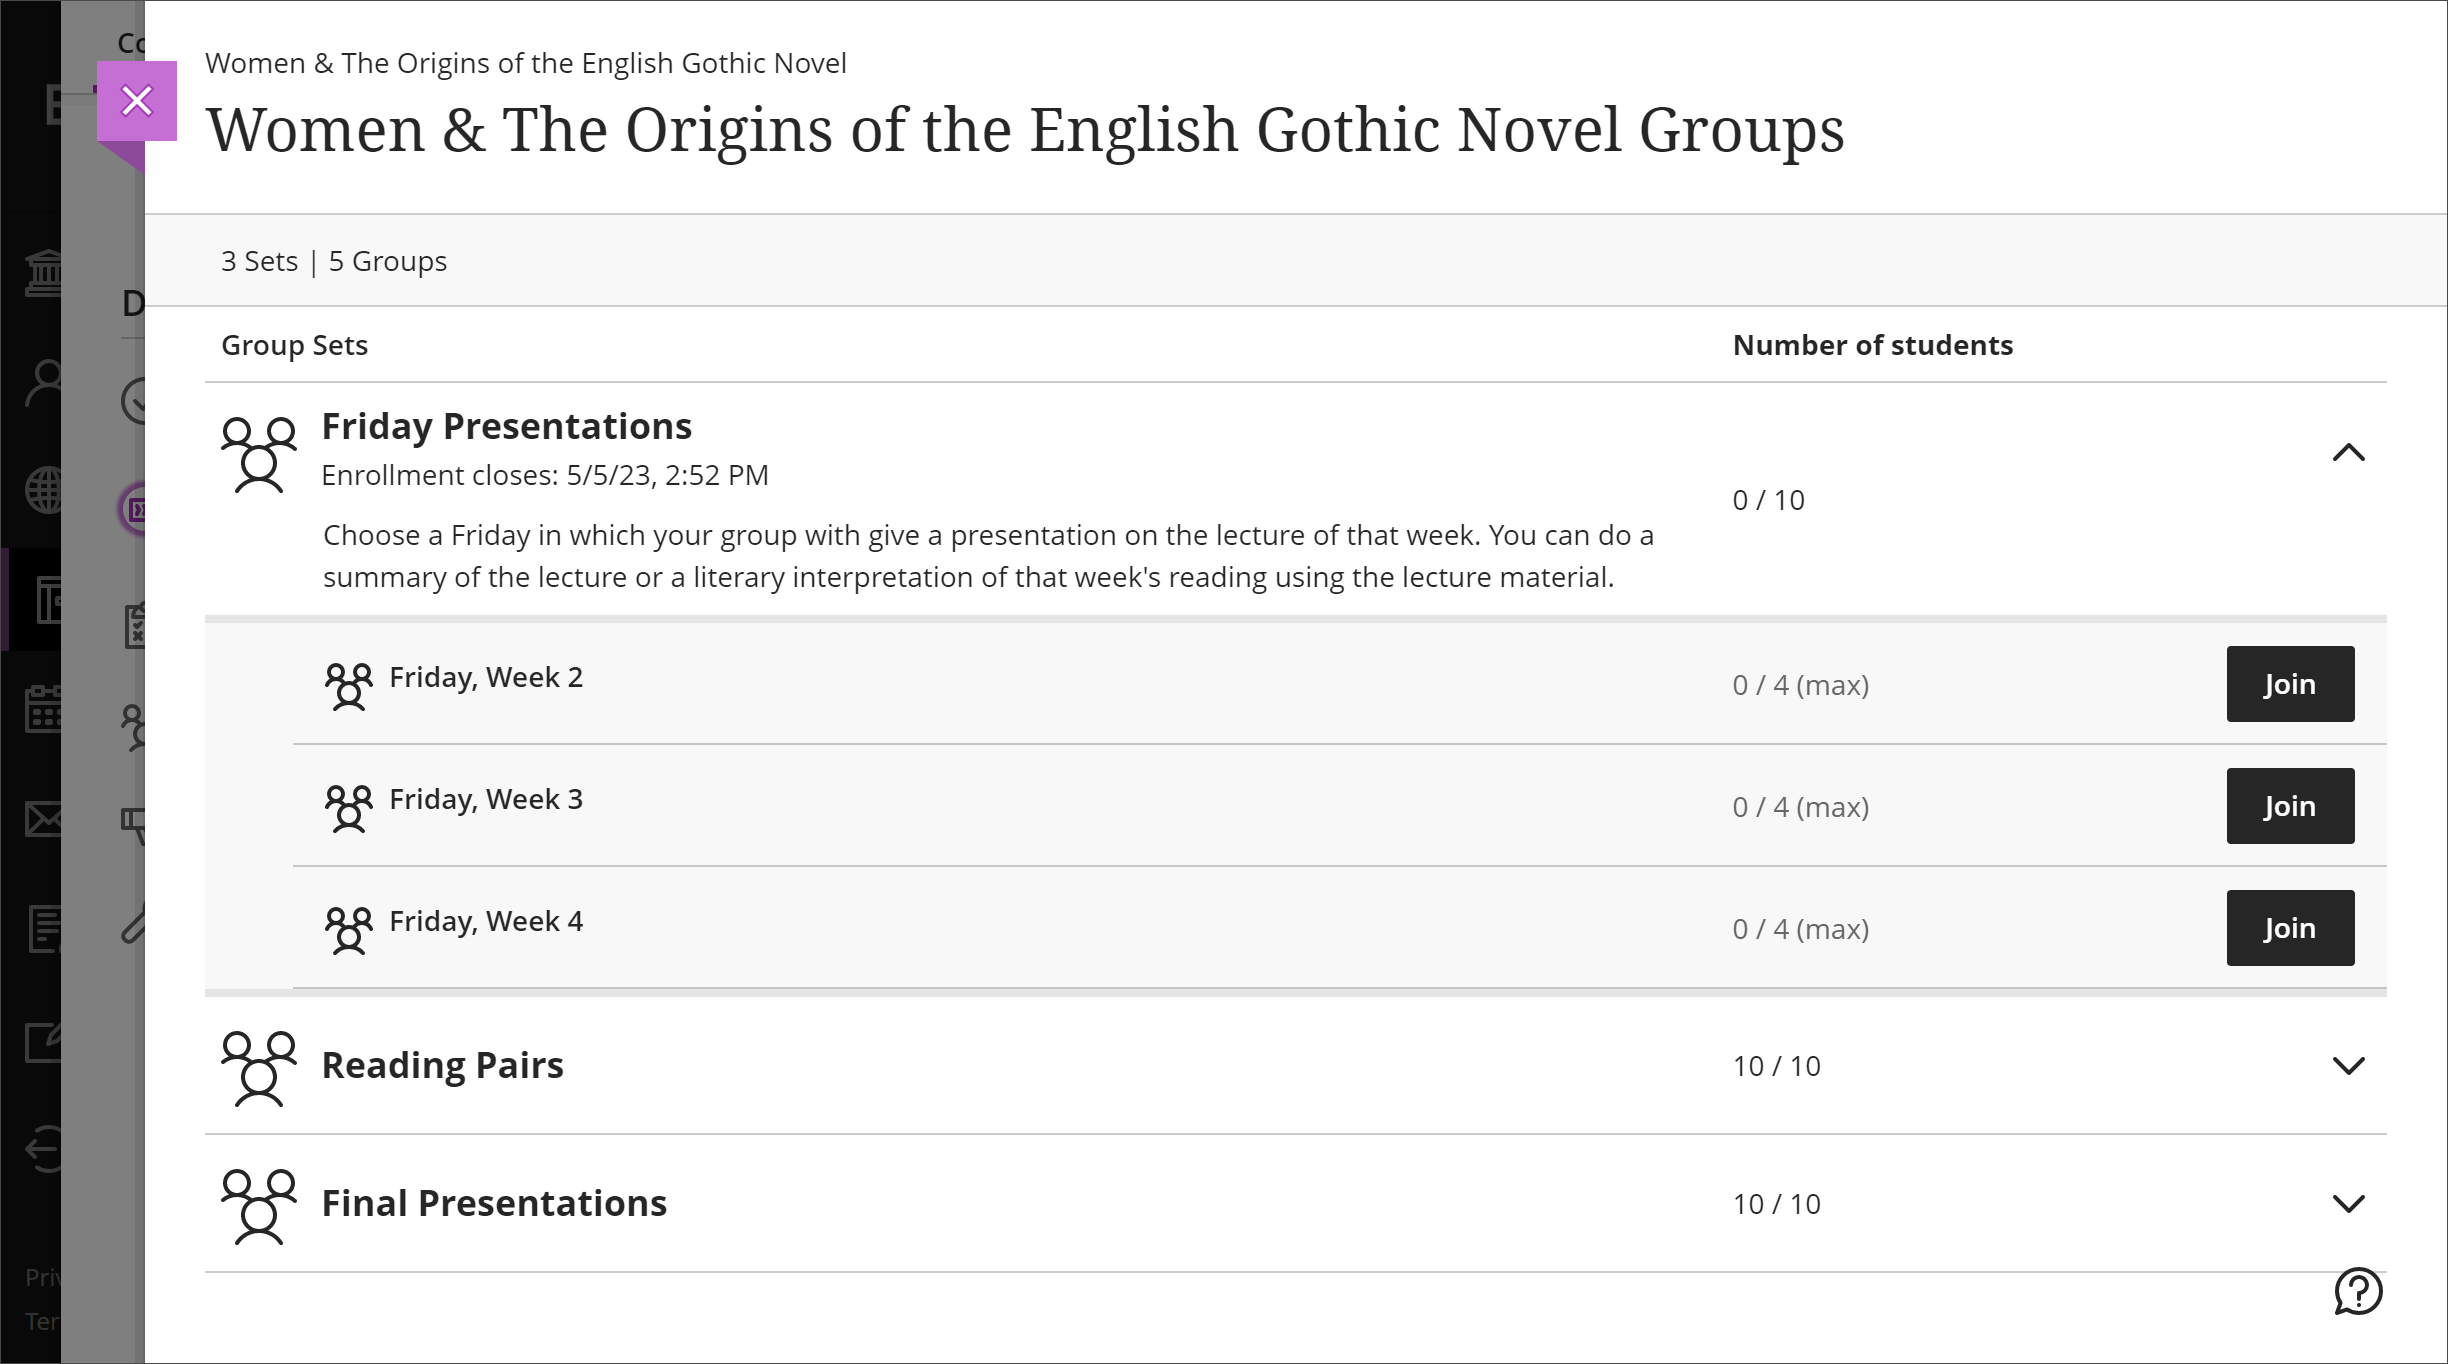 Image of Groups page with options to join a group within a group set.